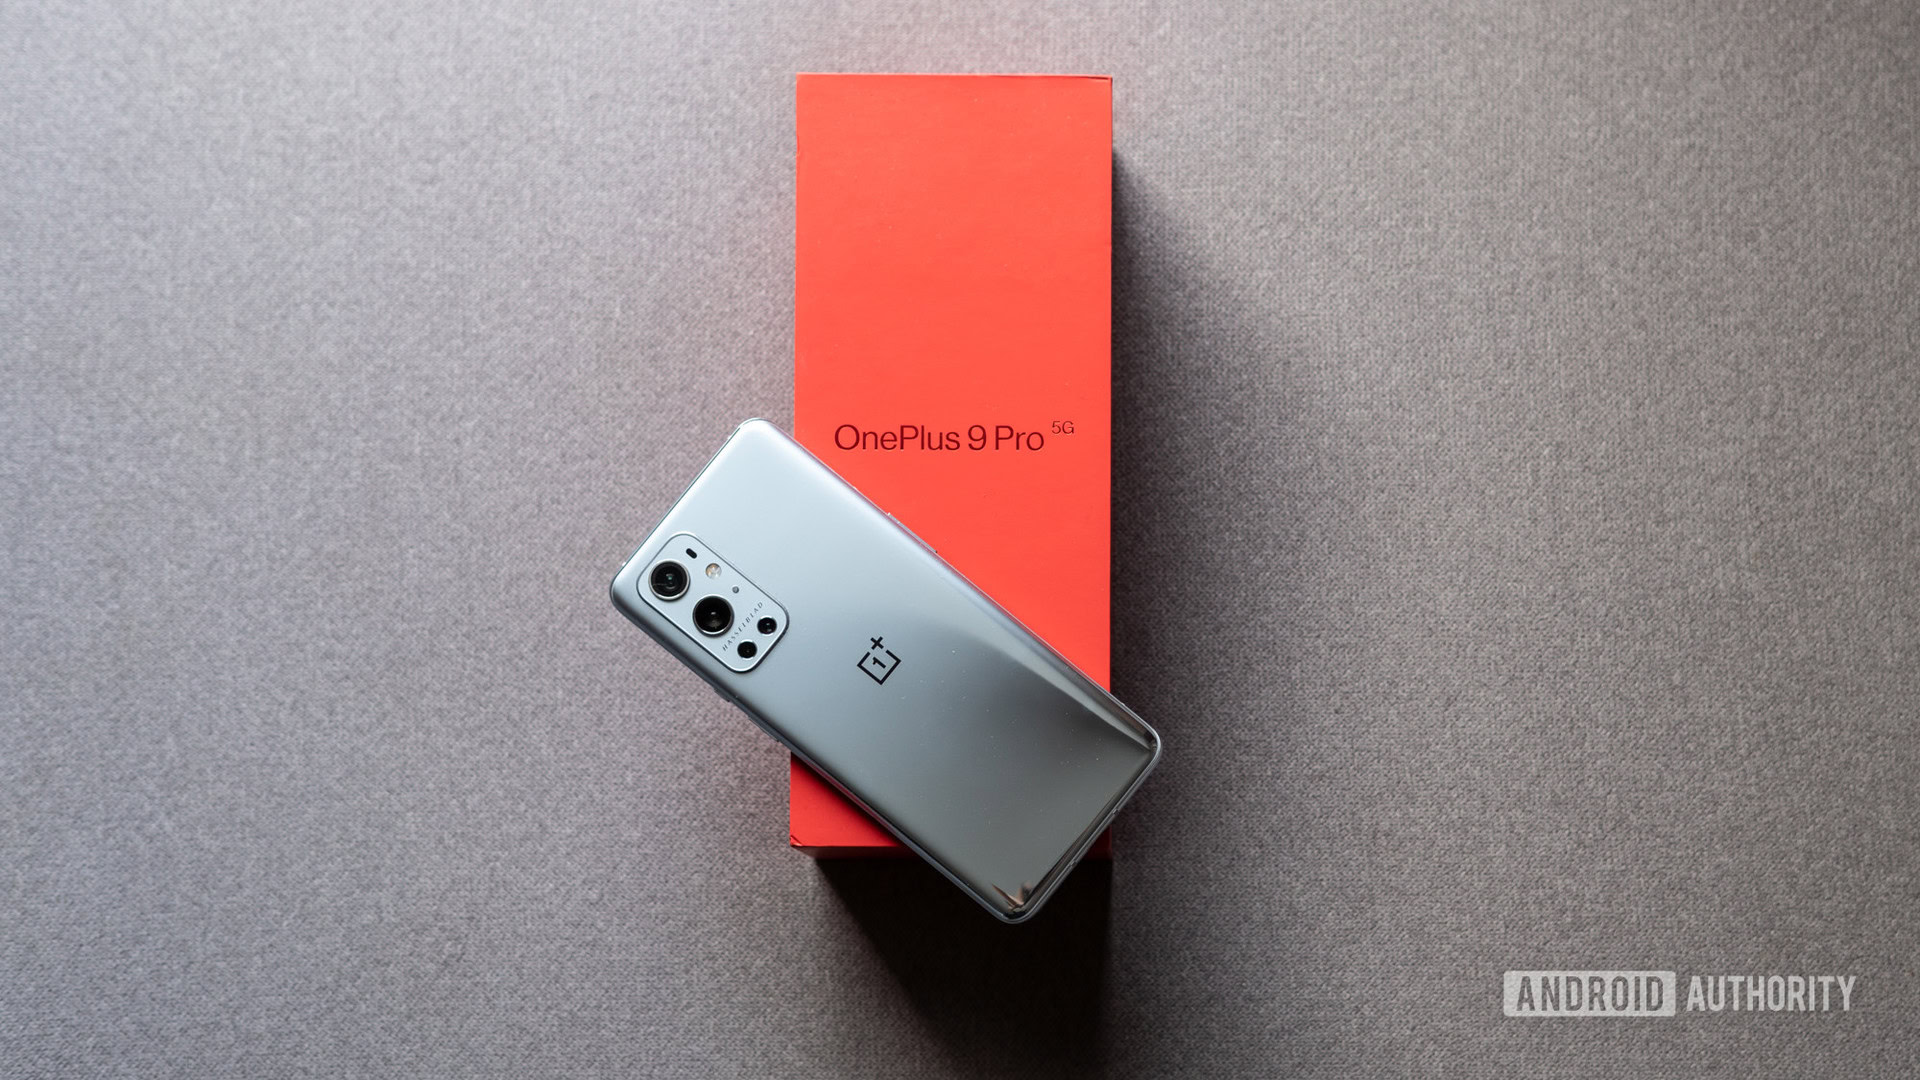 OnePlus 9 Pro review lead image on box